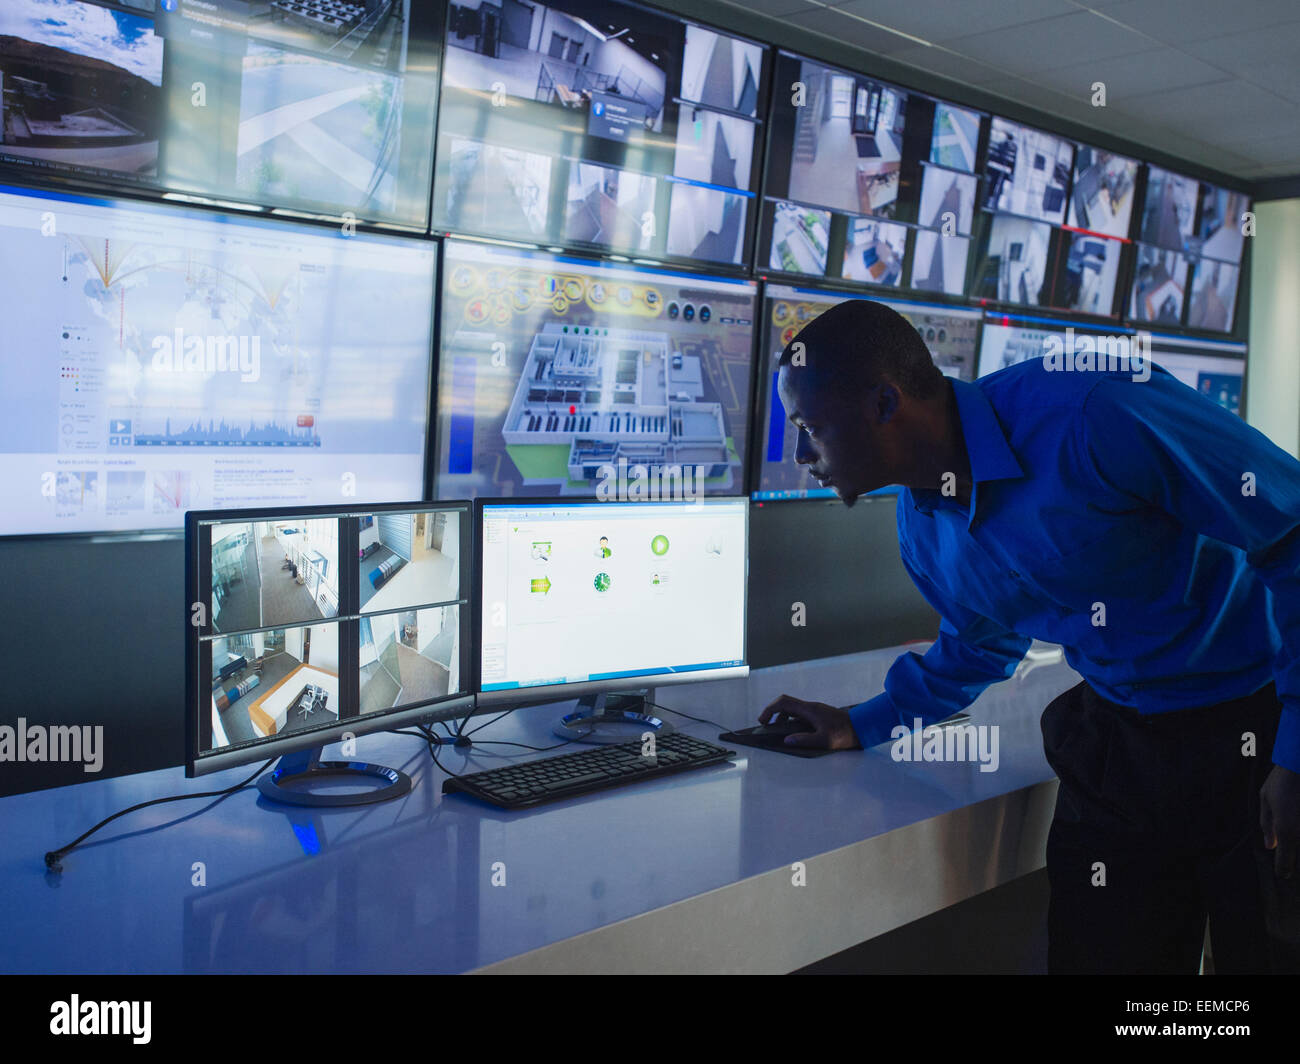 Black security officer watching surveillance cameras Stock Photo